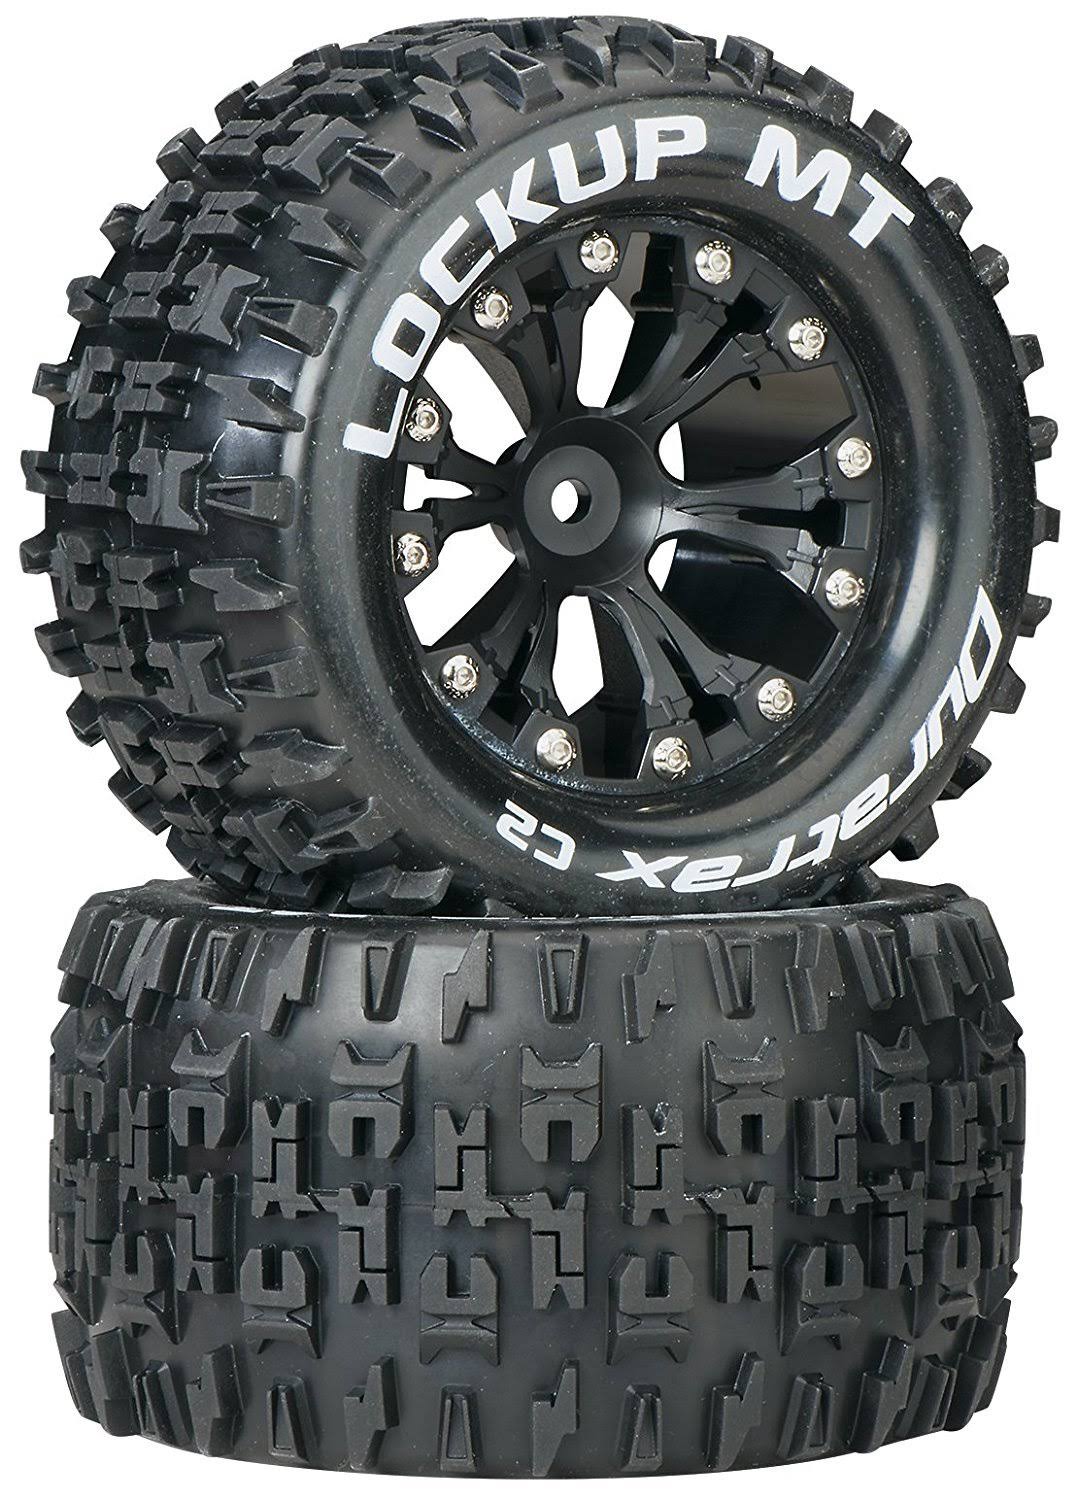 Duratrax Lockup MT Monster Truck Tires Foam Inserts C2 Soft Compound Mounted on Rear Wheels - 2pc, Black, 2.8"